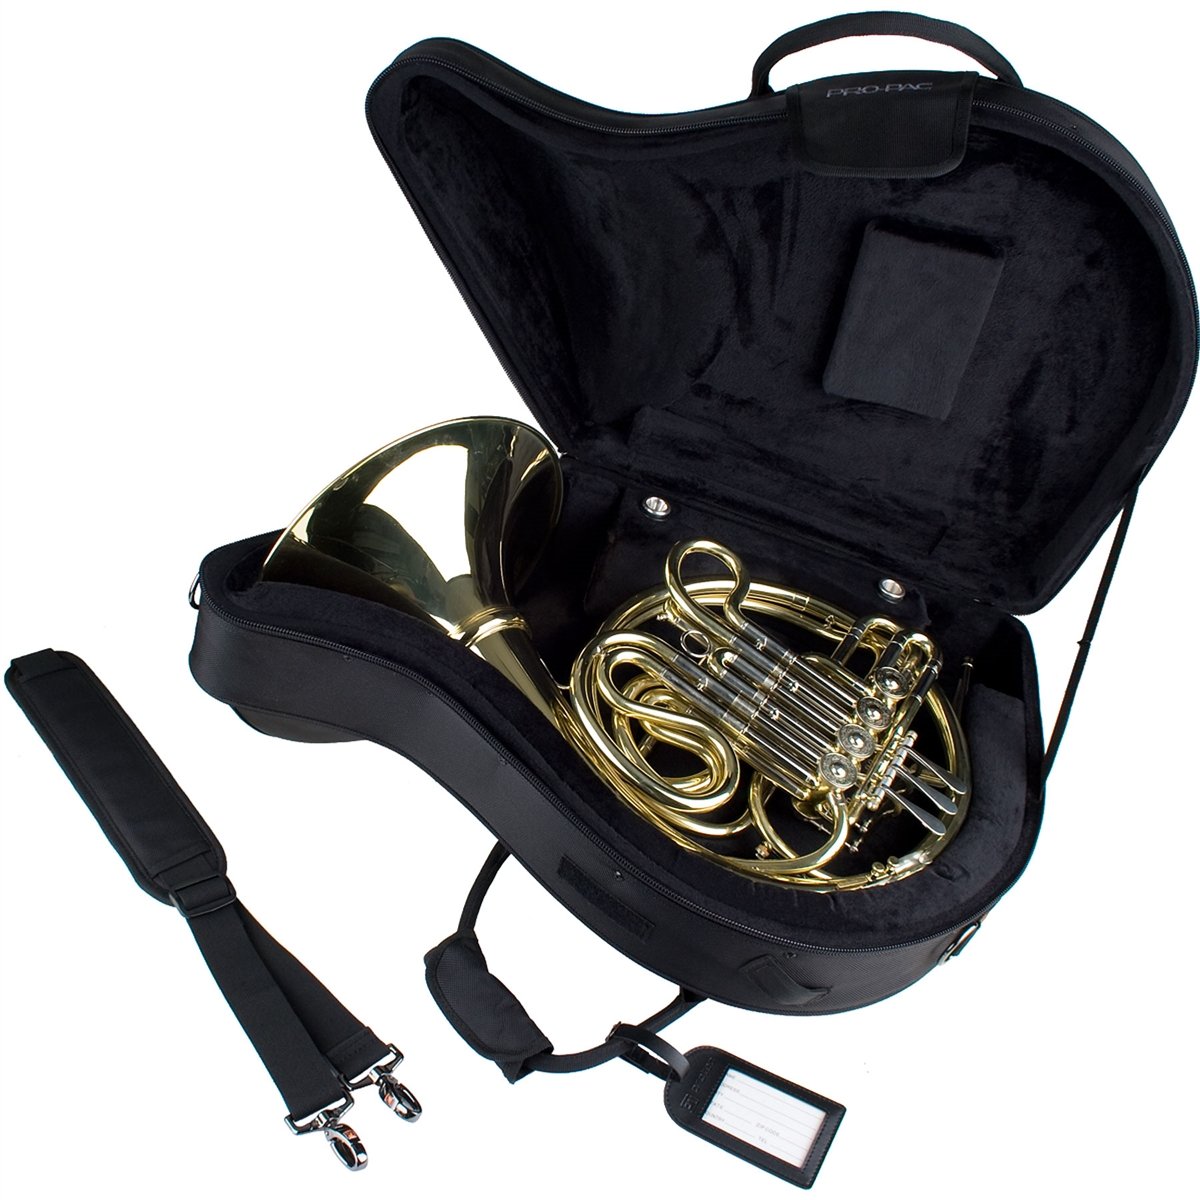 Protec - French Horn Fixed Bell PRO PAC Case (Contoured)-Case-Protec-Music Elements